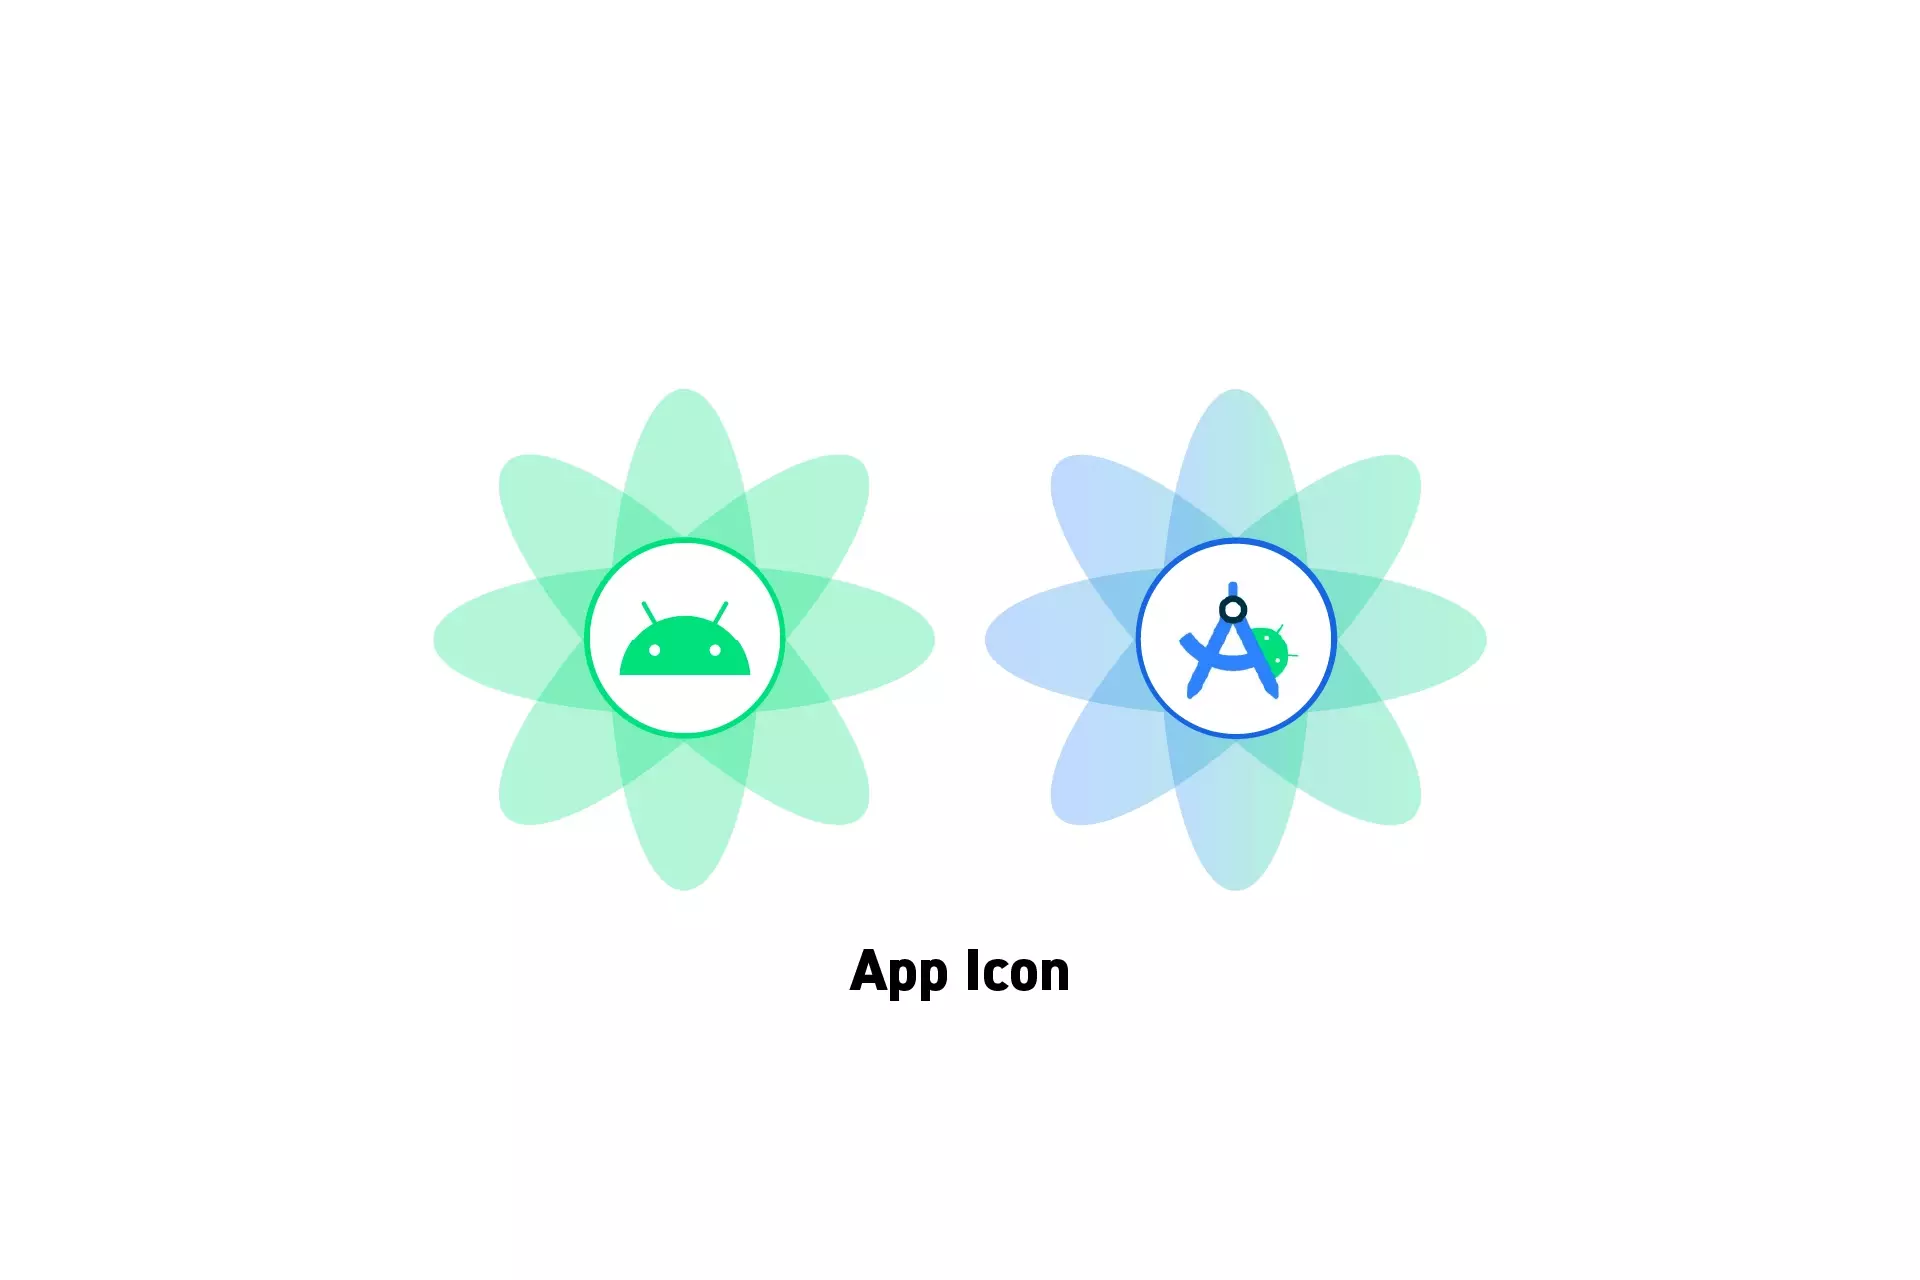 Two flowers that represent Android and Android Studio with the text "App Icon" beneath them.